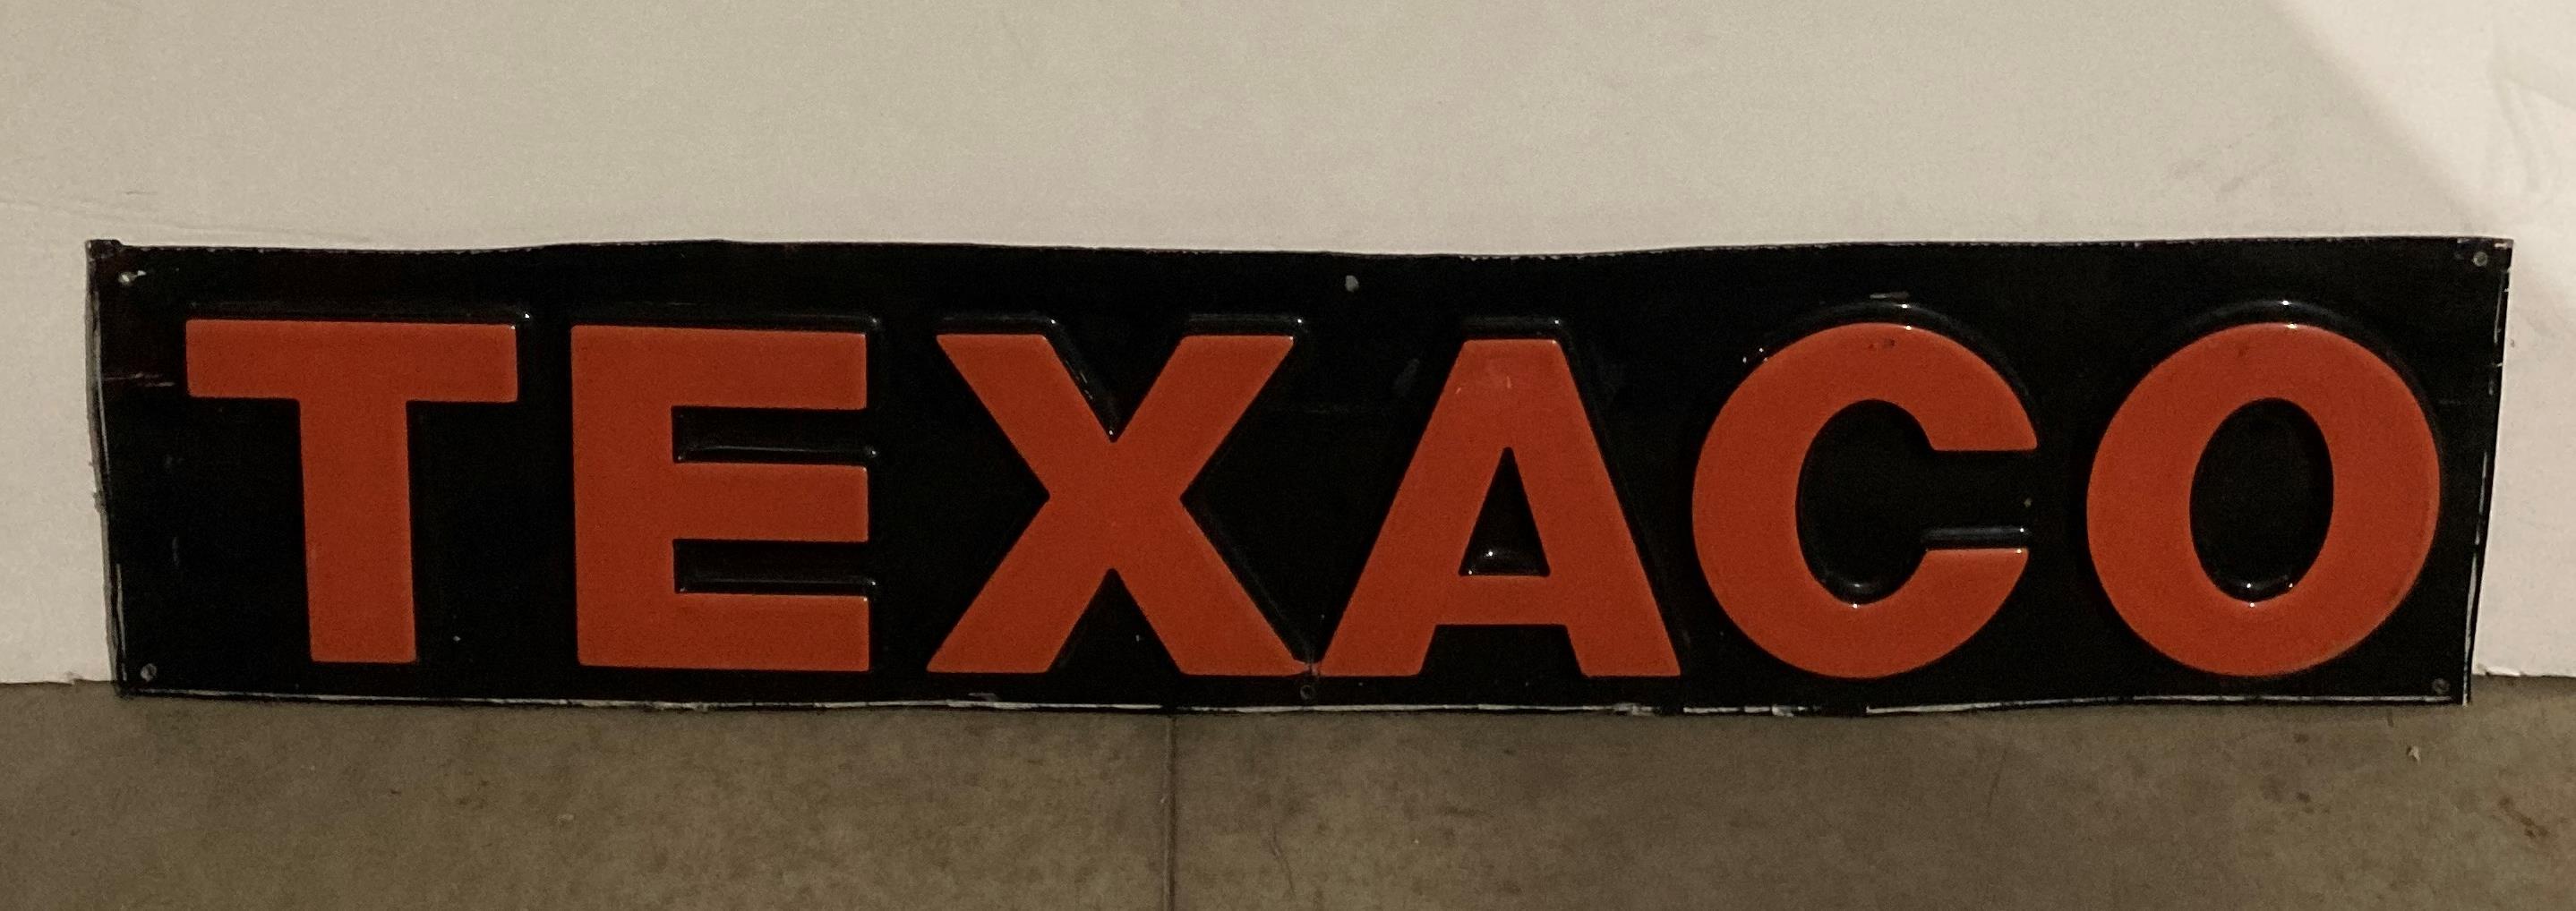 Perspex 'Texaco' black and red fuel sign - size 136 x 28cm (saleroom location: MA1 wall)